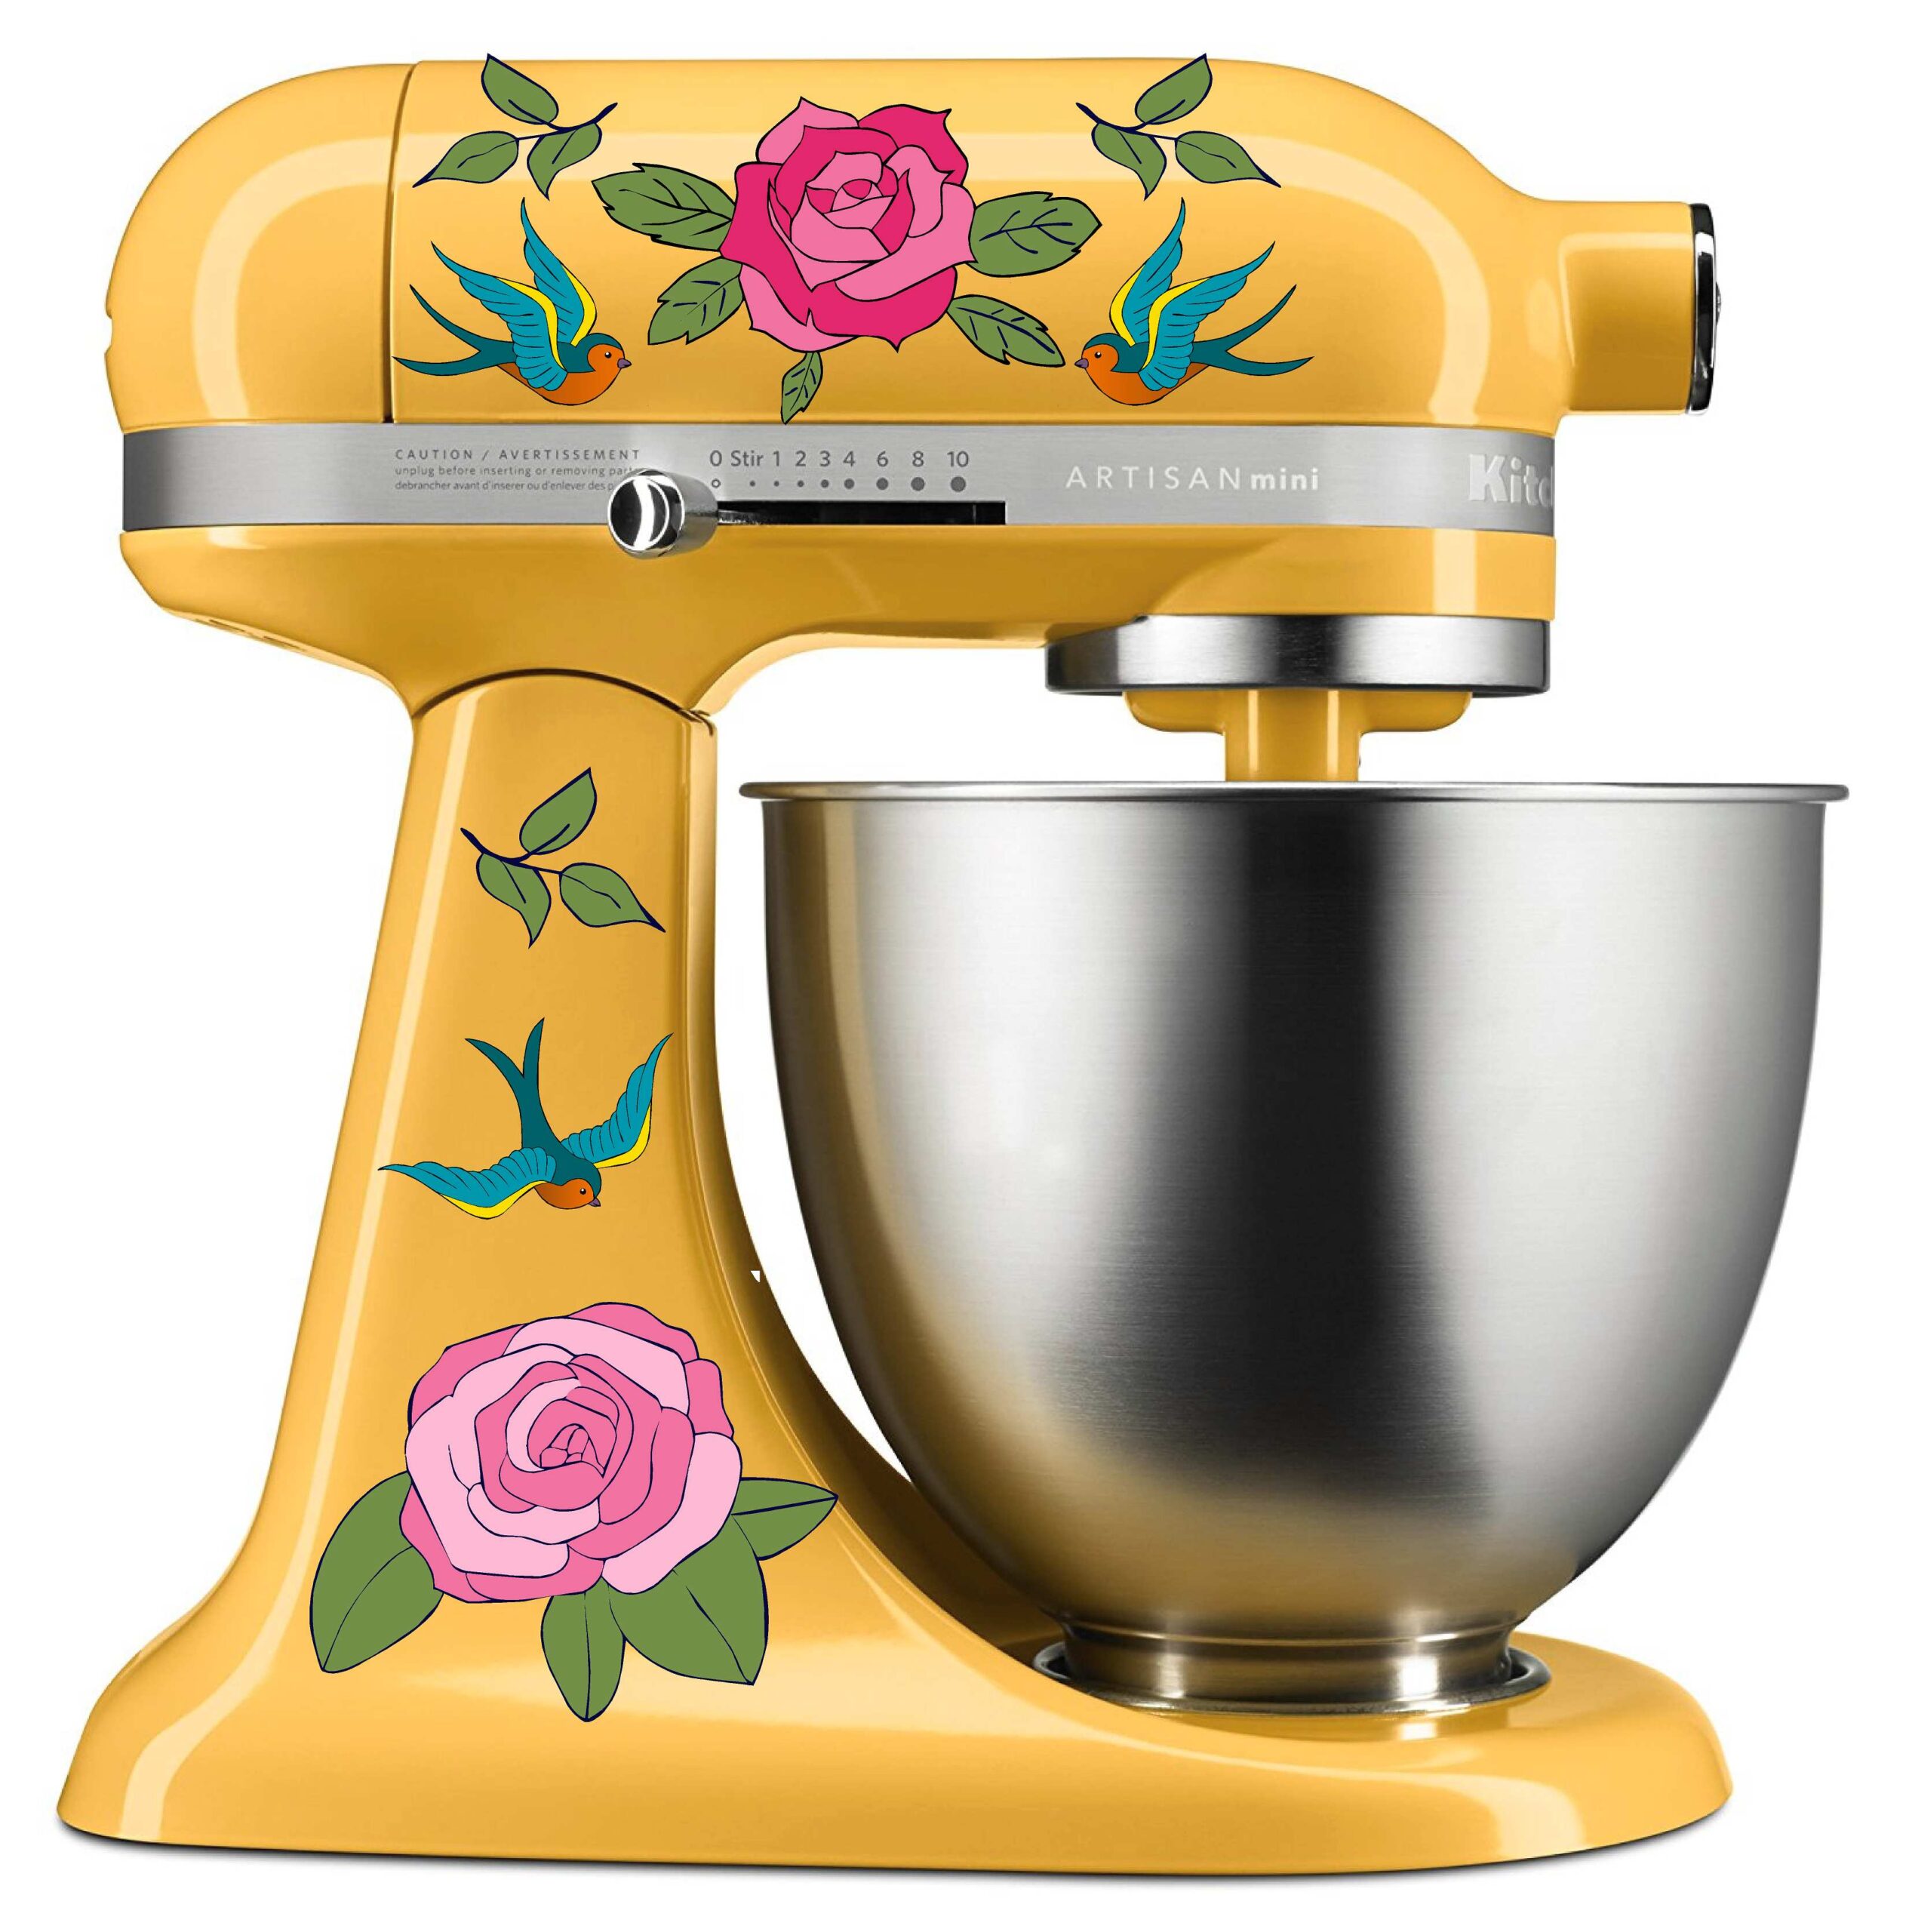 Rock and Roll – Tattoo Themed Vinyl Decals for Your Kitchenaid